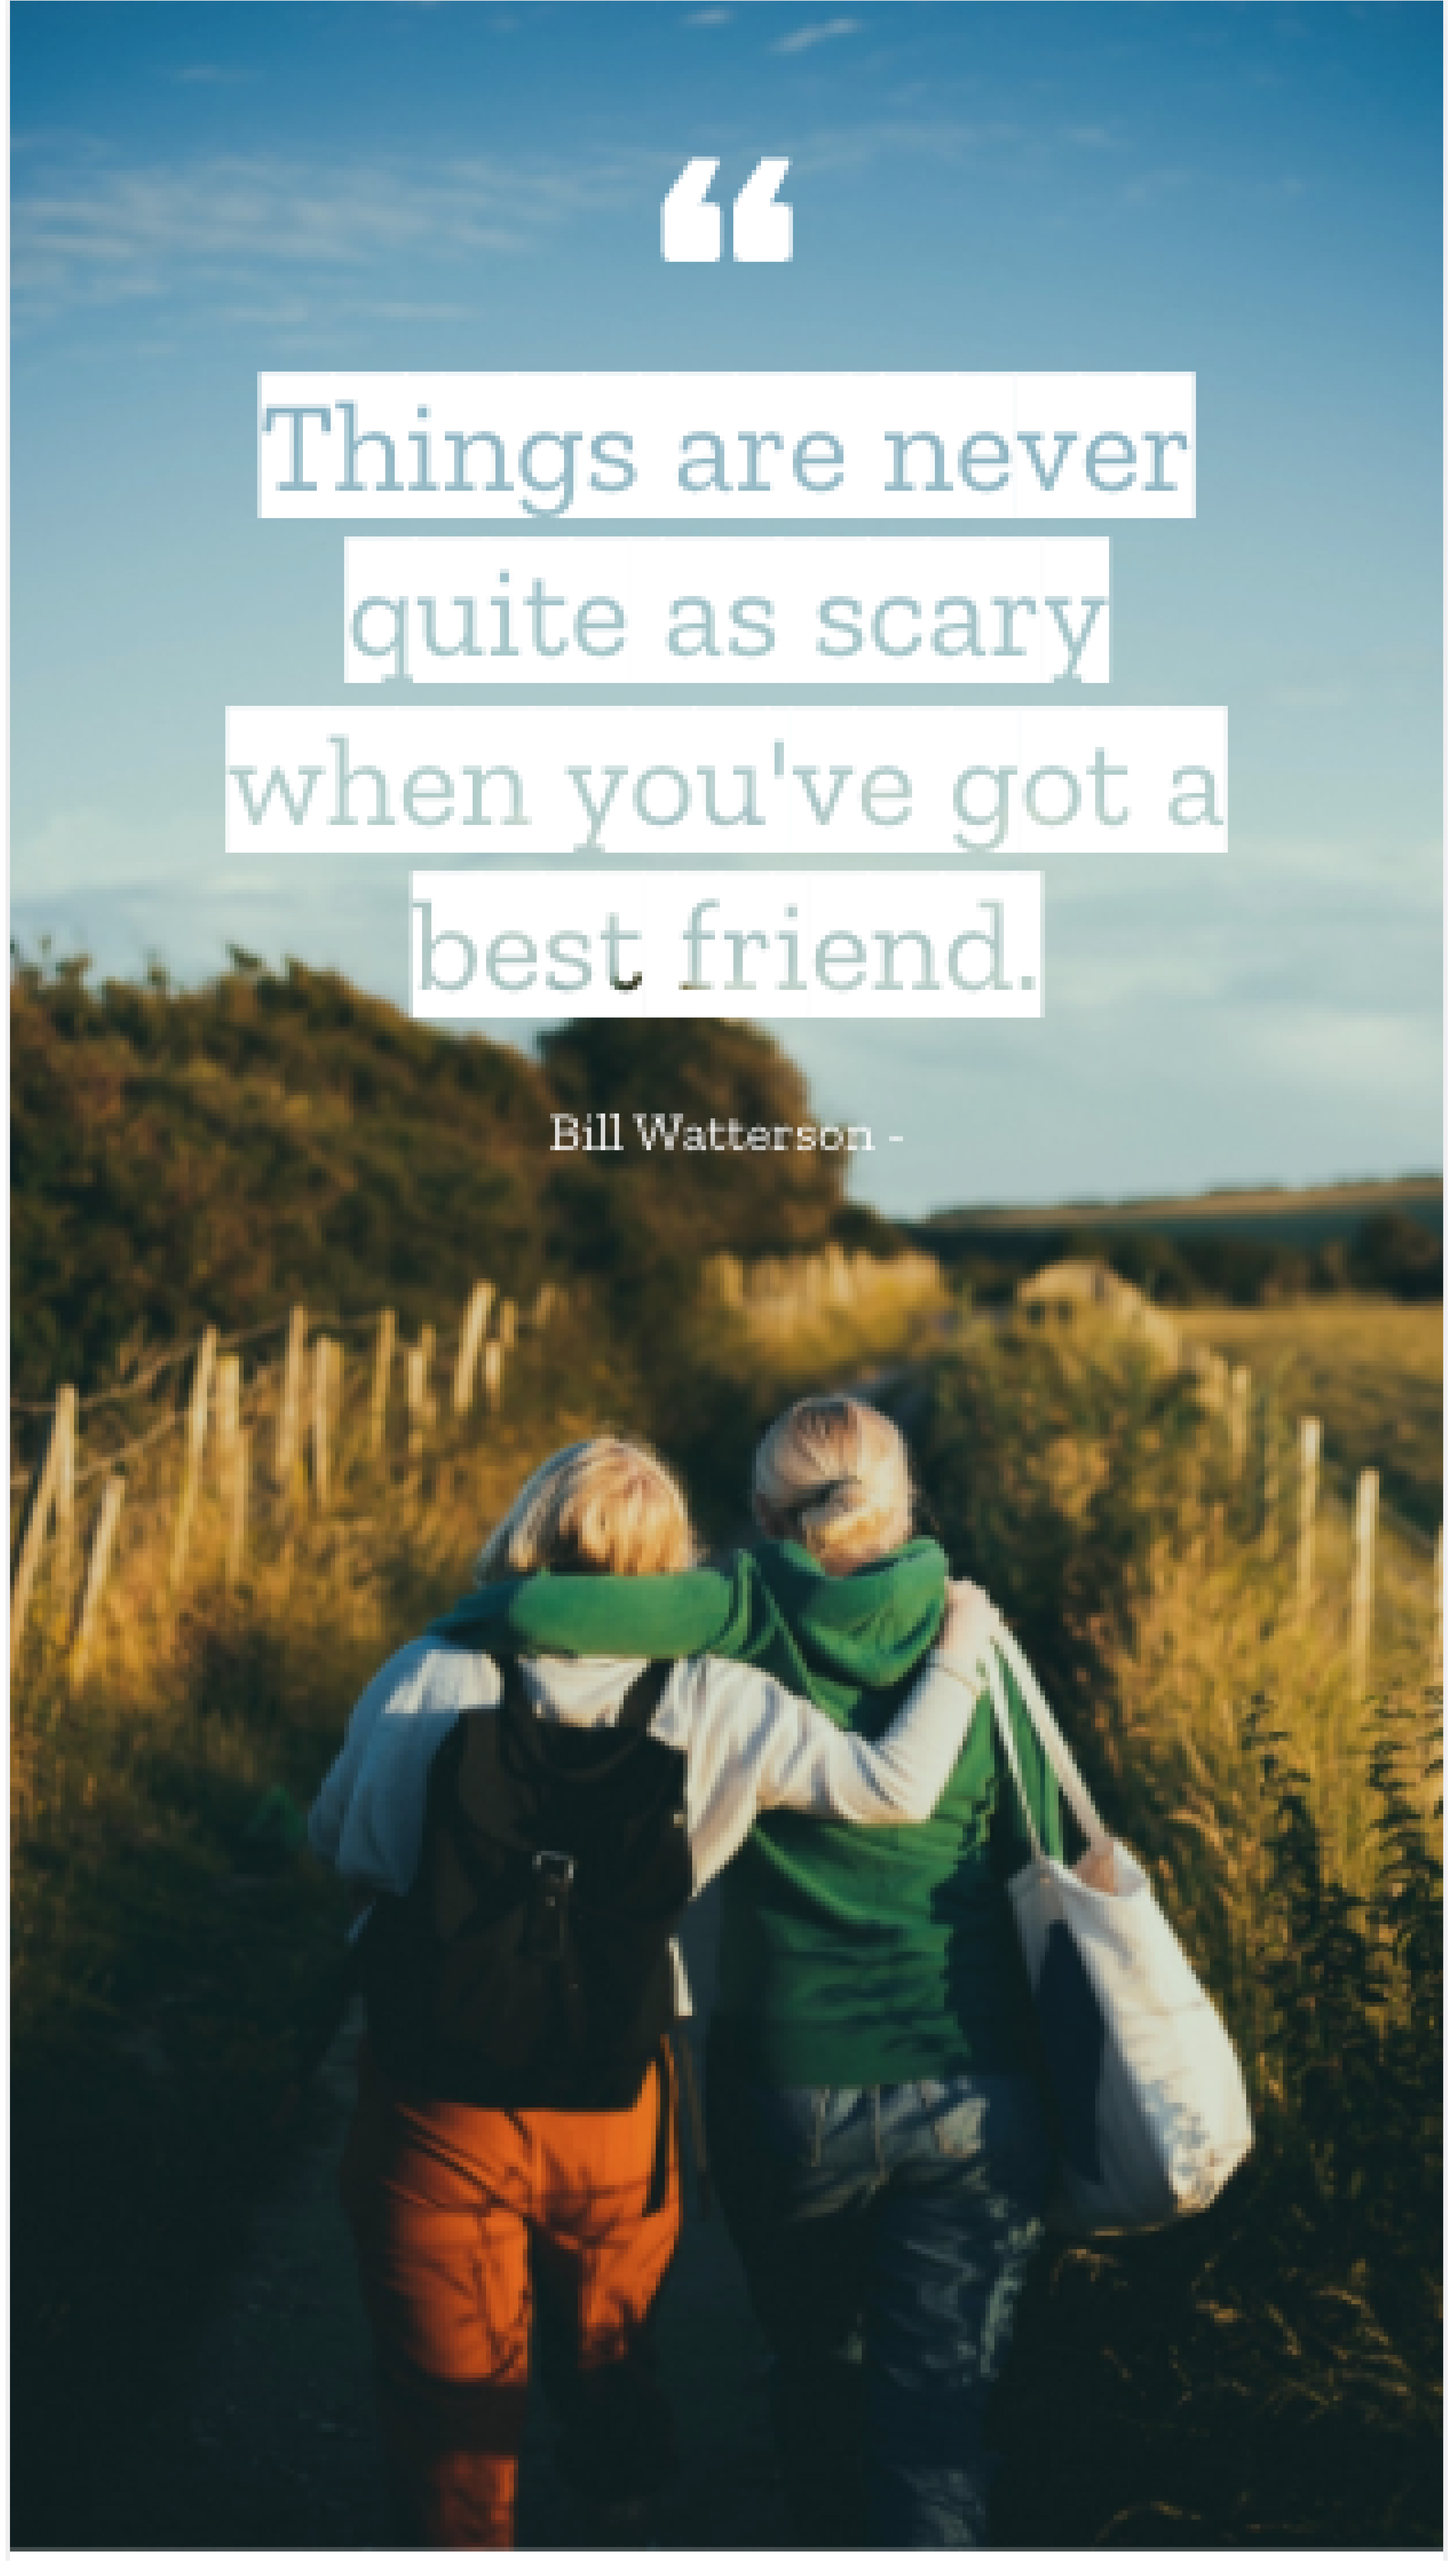 Bill Watterson - Things are never quite as scary when you've got a best friend.